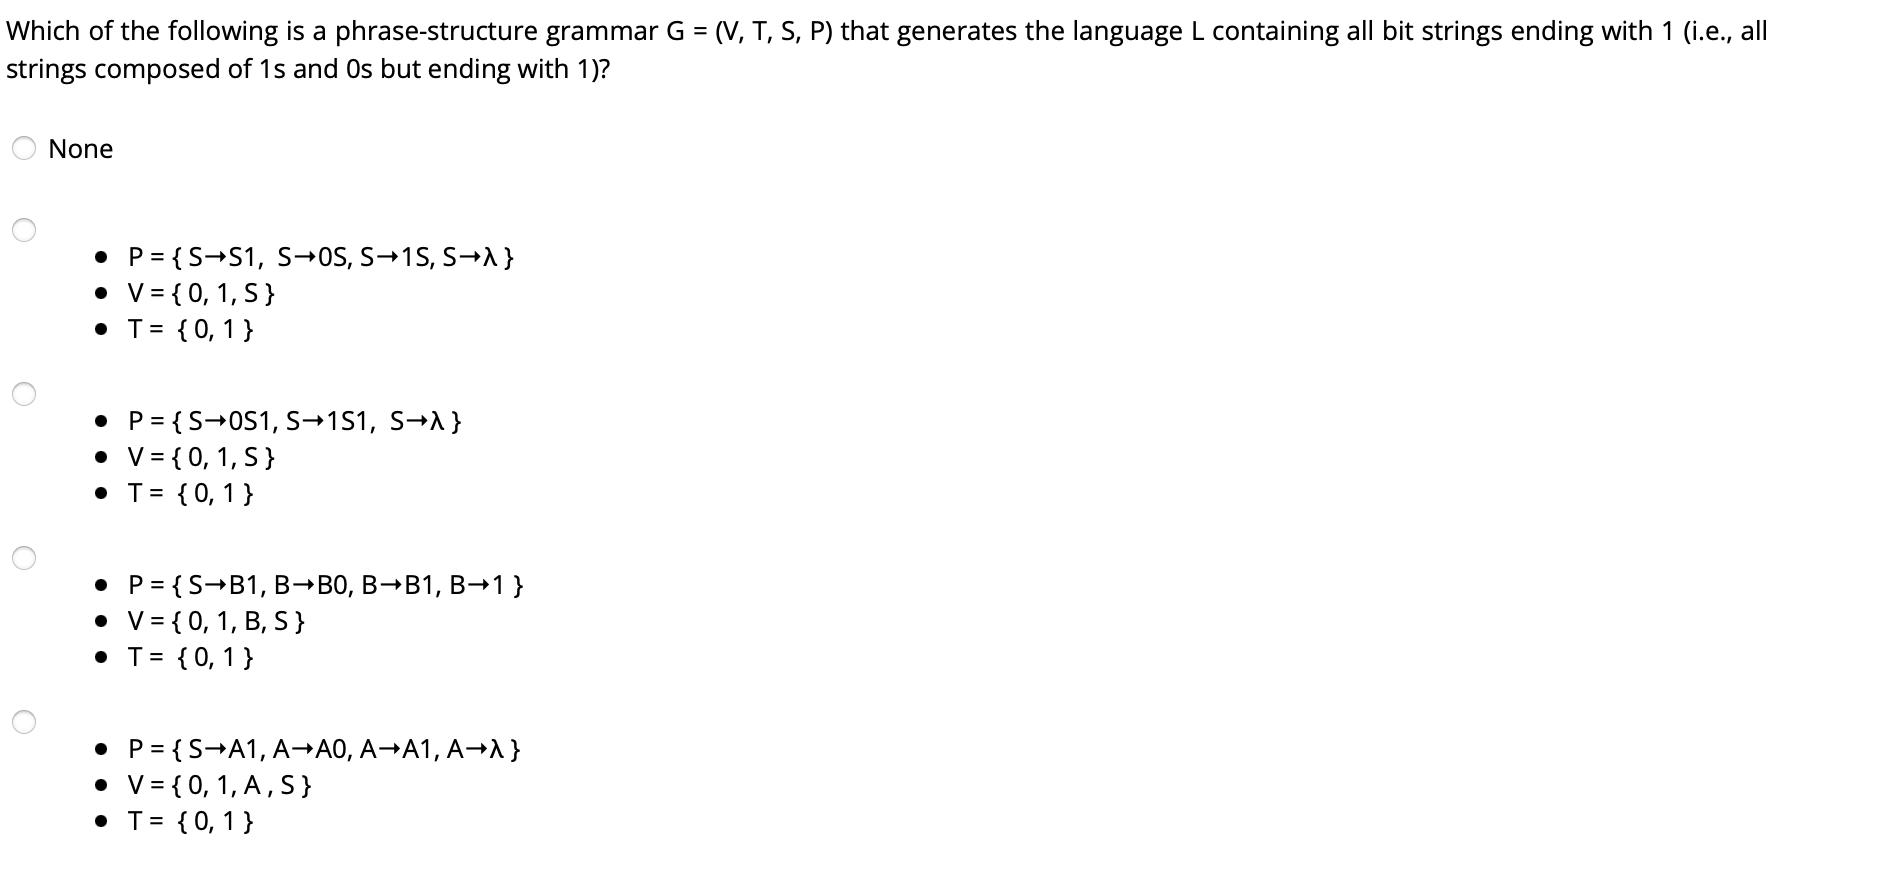 Which of the following is a phrase-structure grammar G = (V, T, S, P) that generates the language L